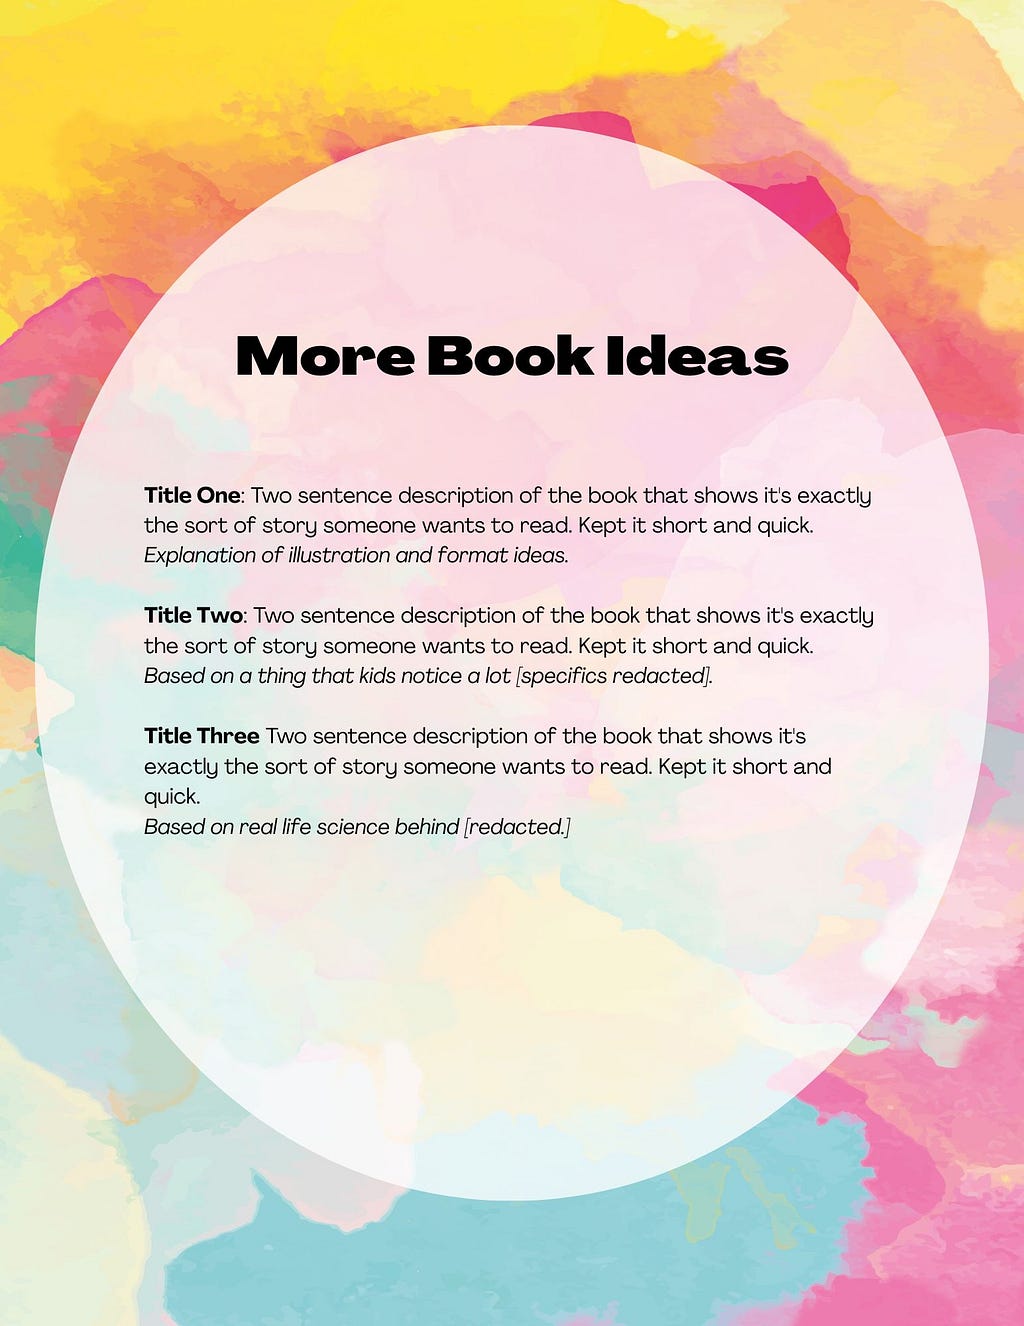 Colorful background with text in an opaque white circle over it. Top reads “More Book Ideas” and three books are listed with examples of dummy text. Fully list can’t fit in alt text description but the important thing is that it is a fun, colorful way to show off three book ideas that feels more impactful than a Word doc. If you are visually impaired and want help formatting a similar list, reach out and I’m happy to explain more fully.